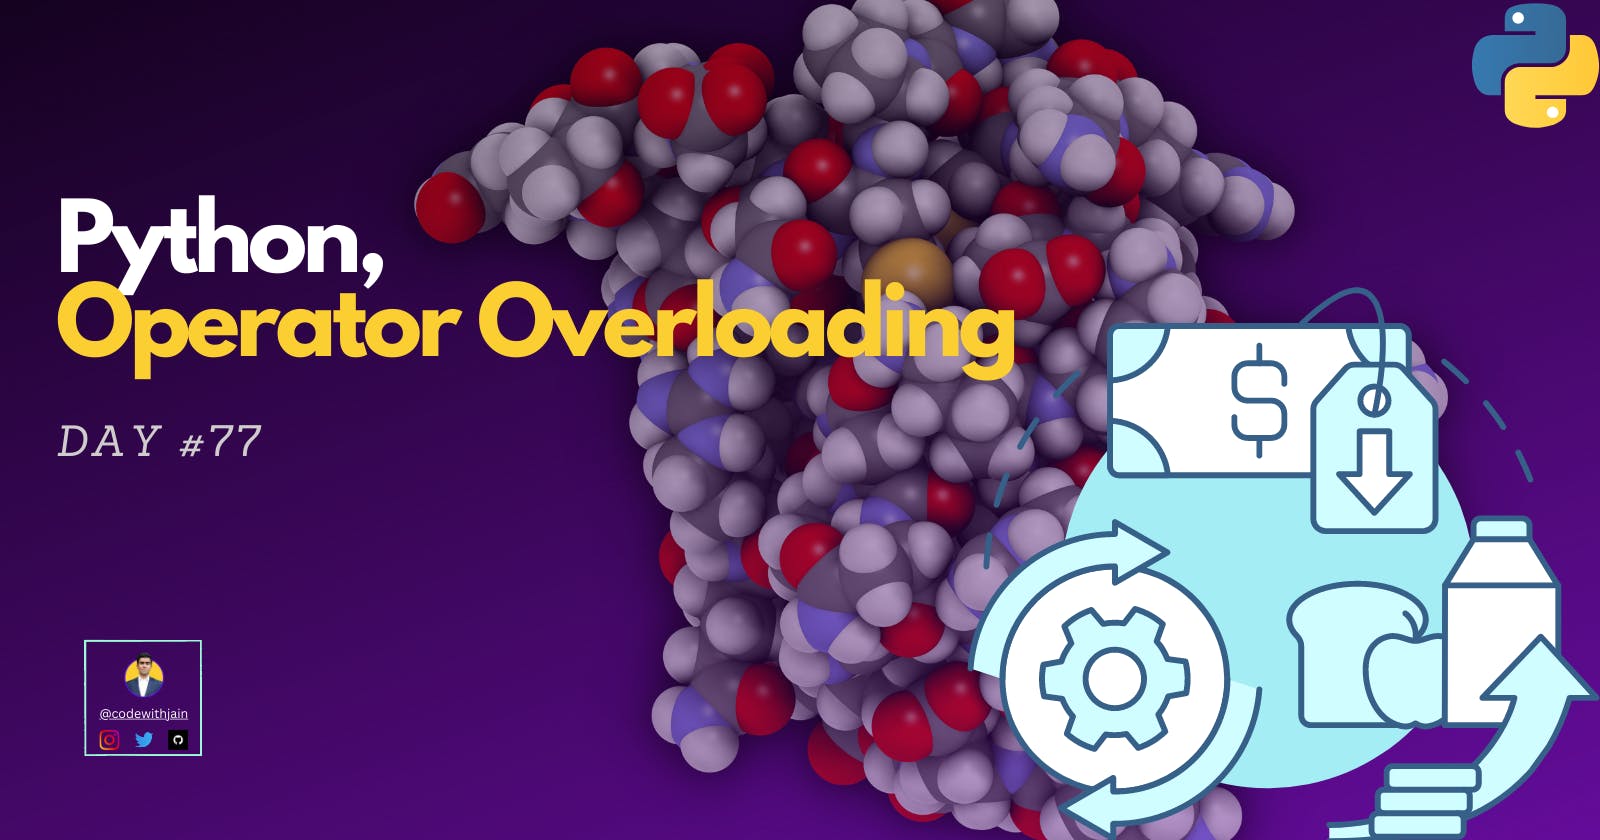 Day #77 - Operator Overloading in Python